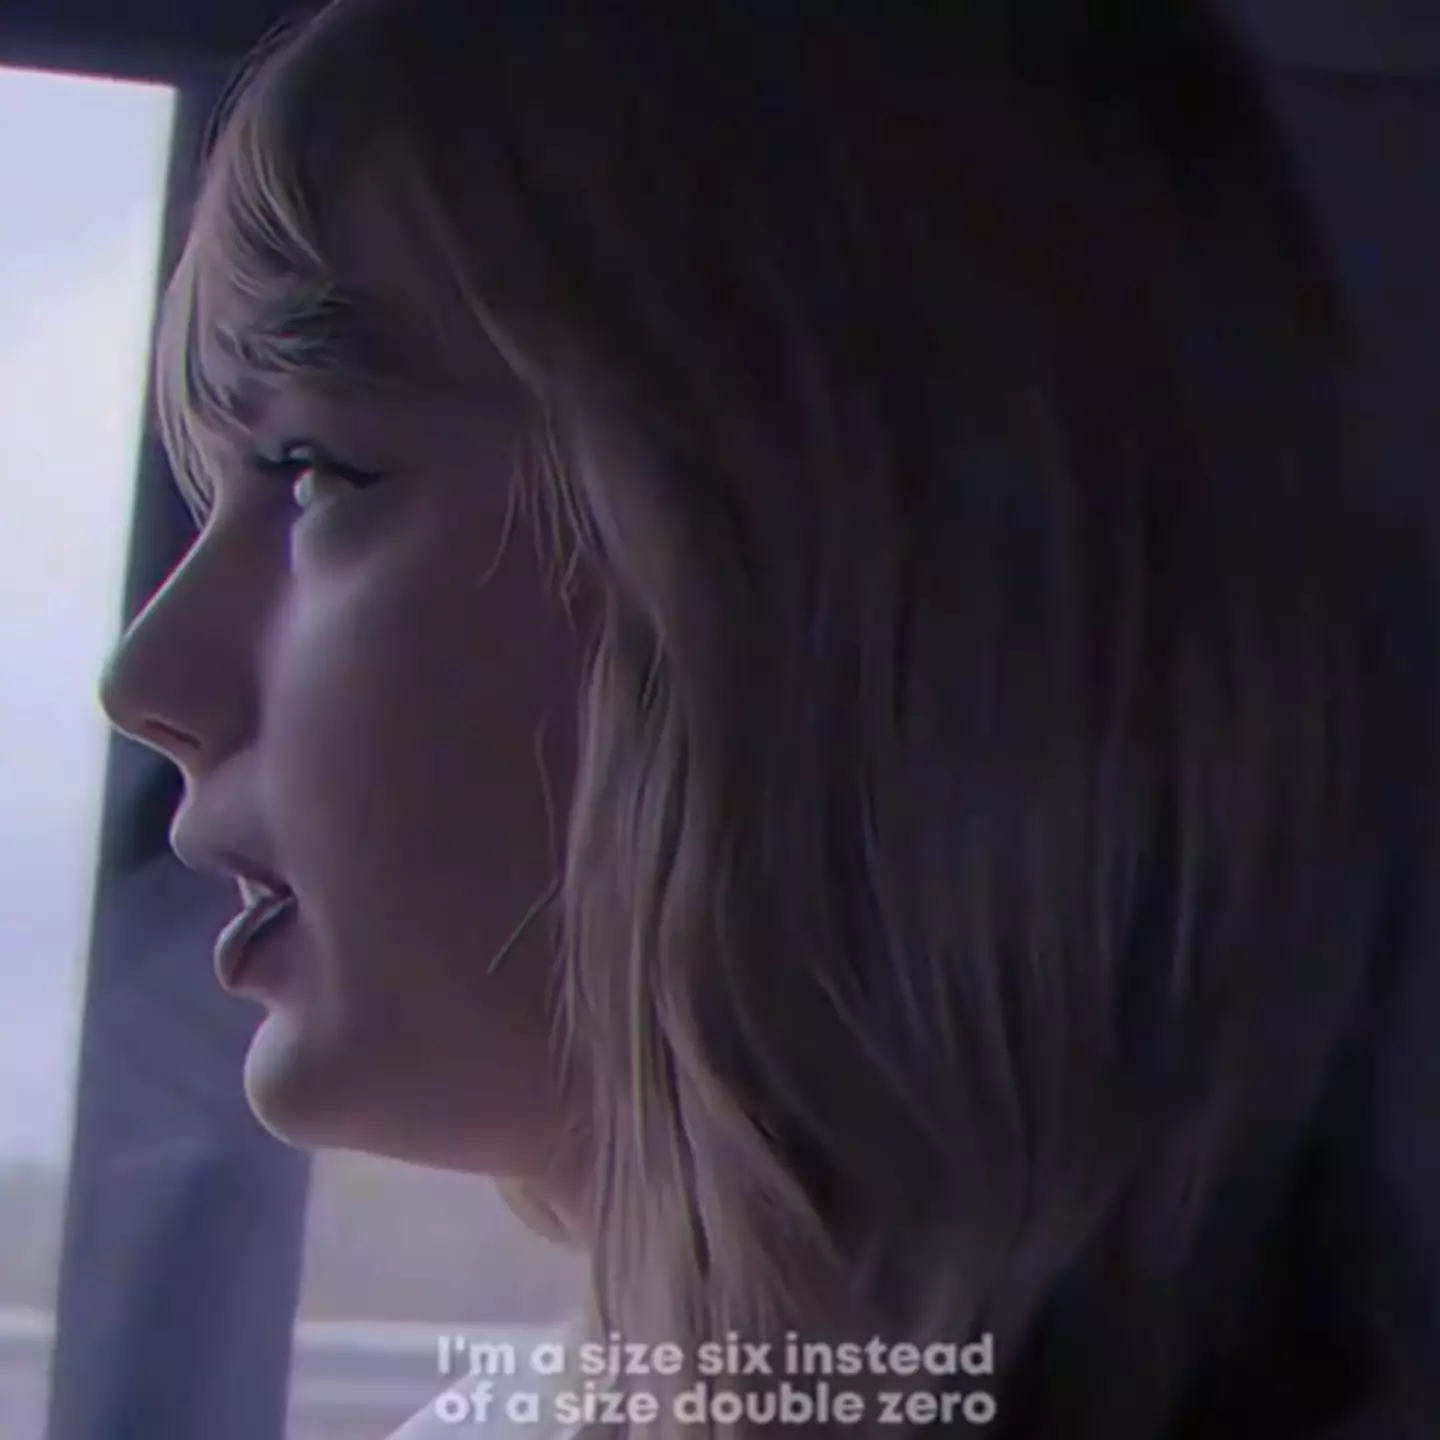 Taylor Swift opened up in her new documentary.